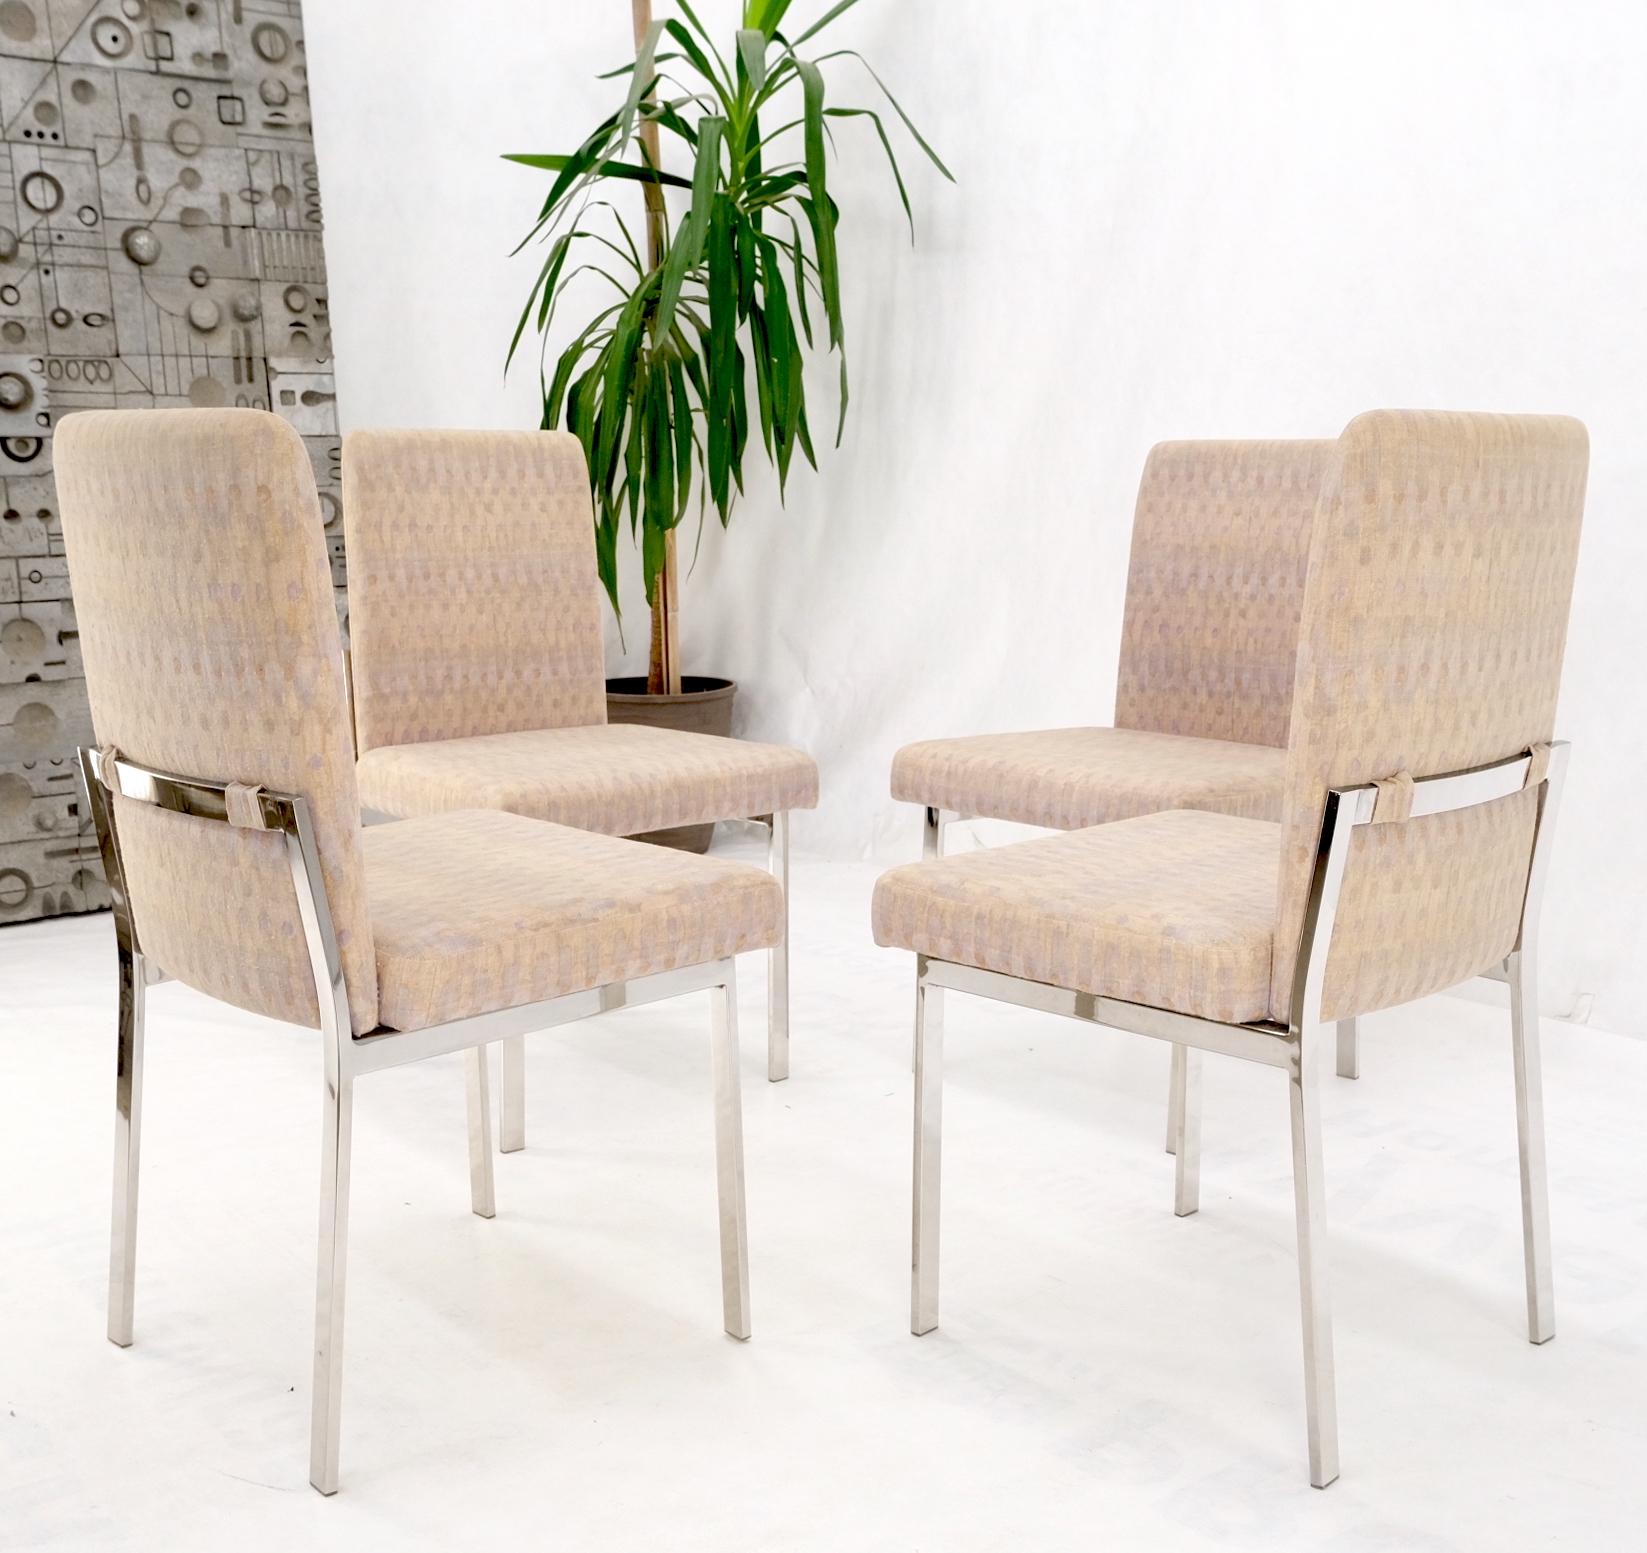 Set of 4 Mid-Century Modern Polished Stainless Steel Upholstered Dining Chairs For Sale 5